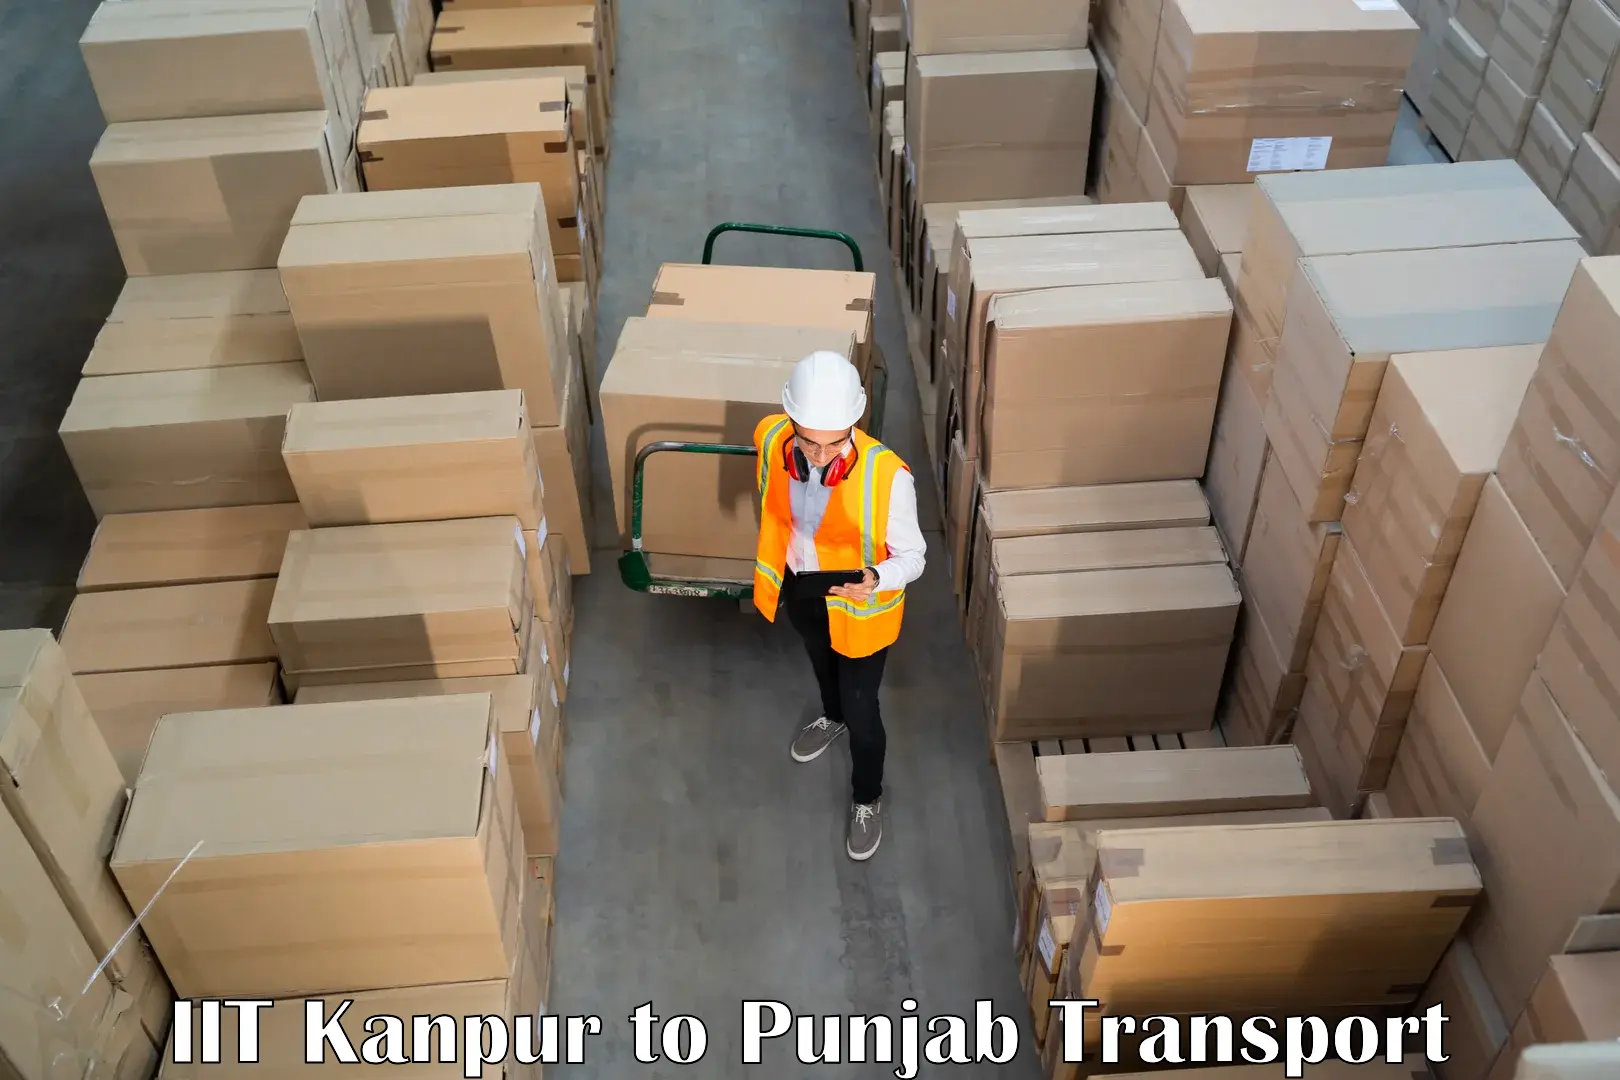 Commercial transport service IIT Kanpur to Zira